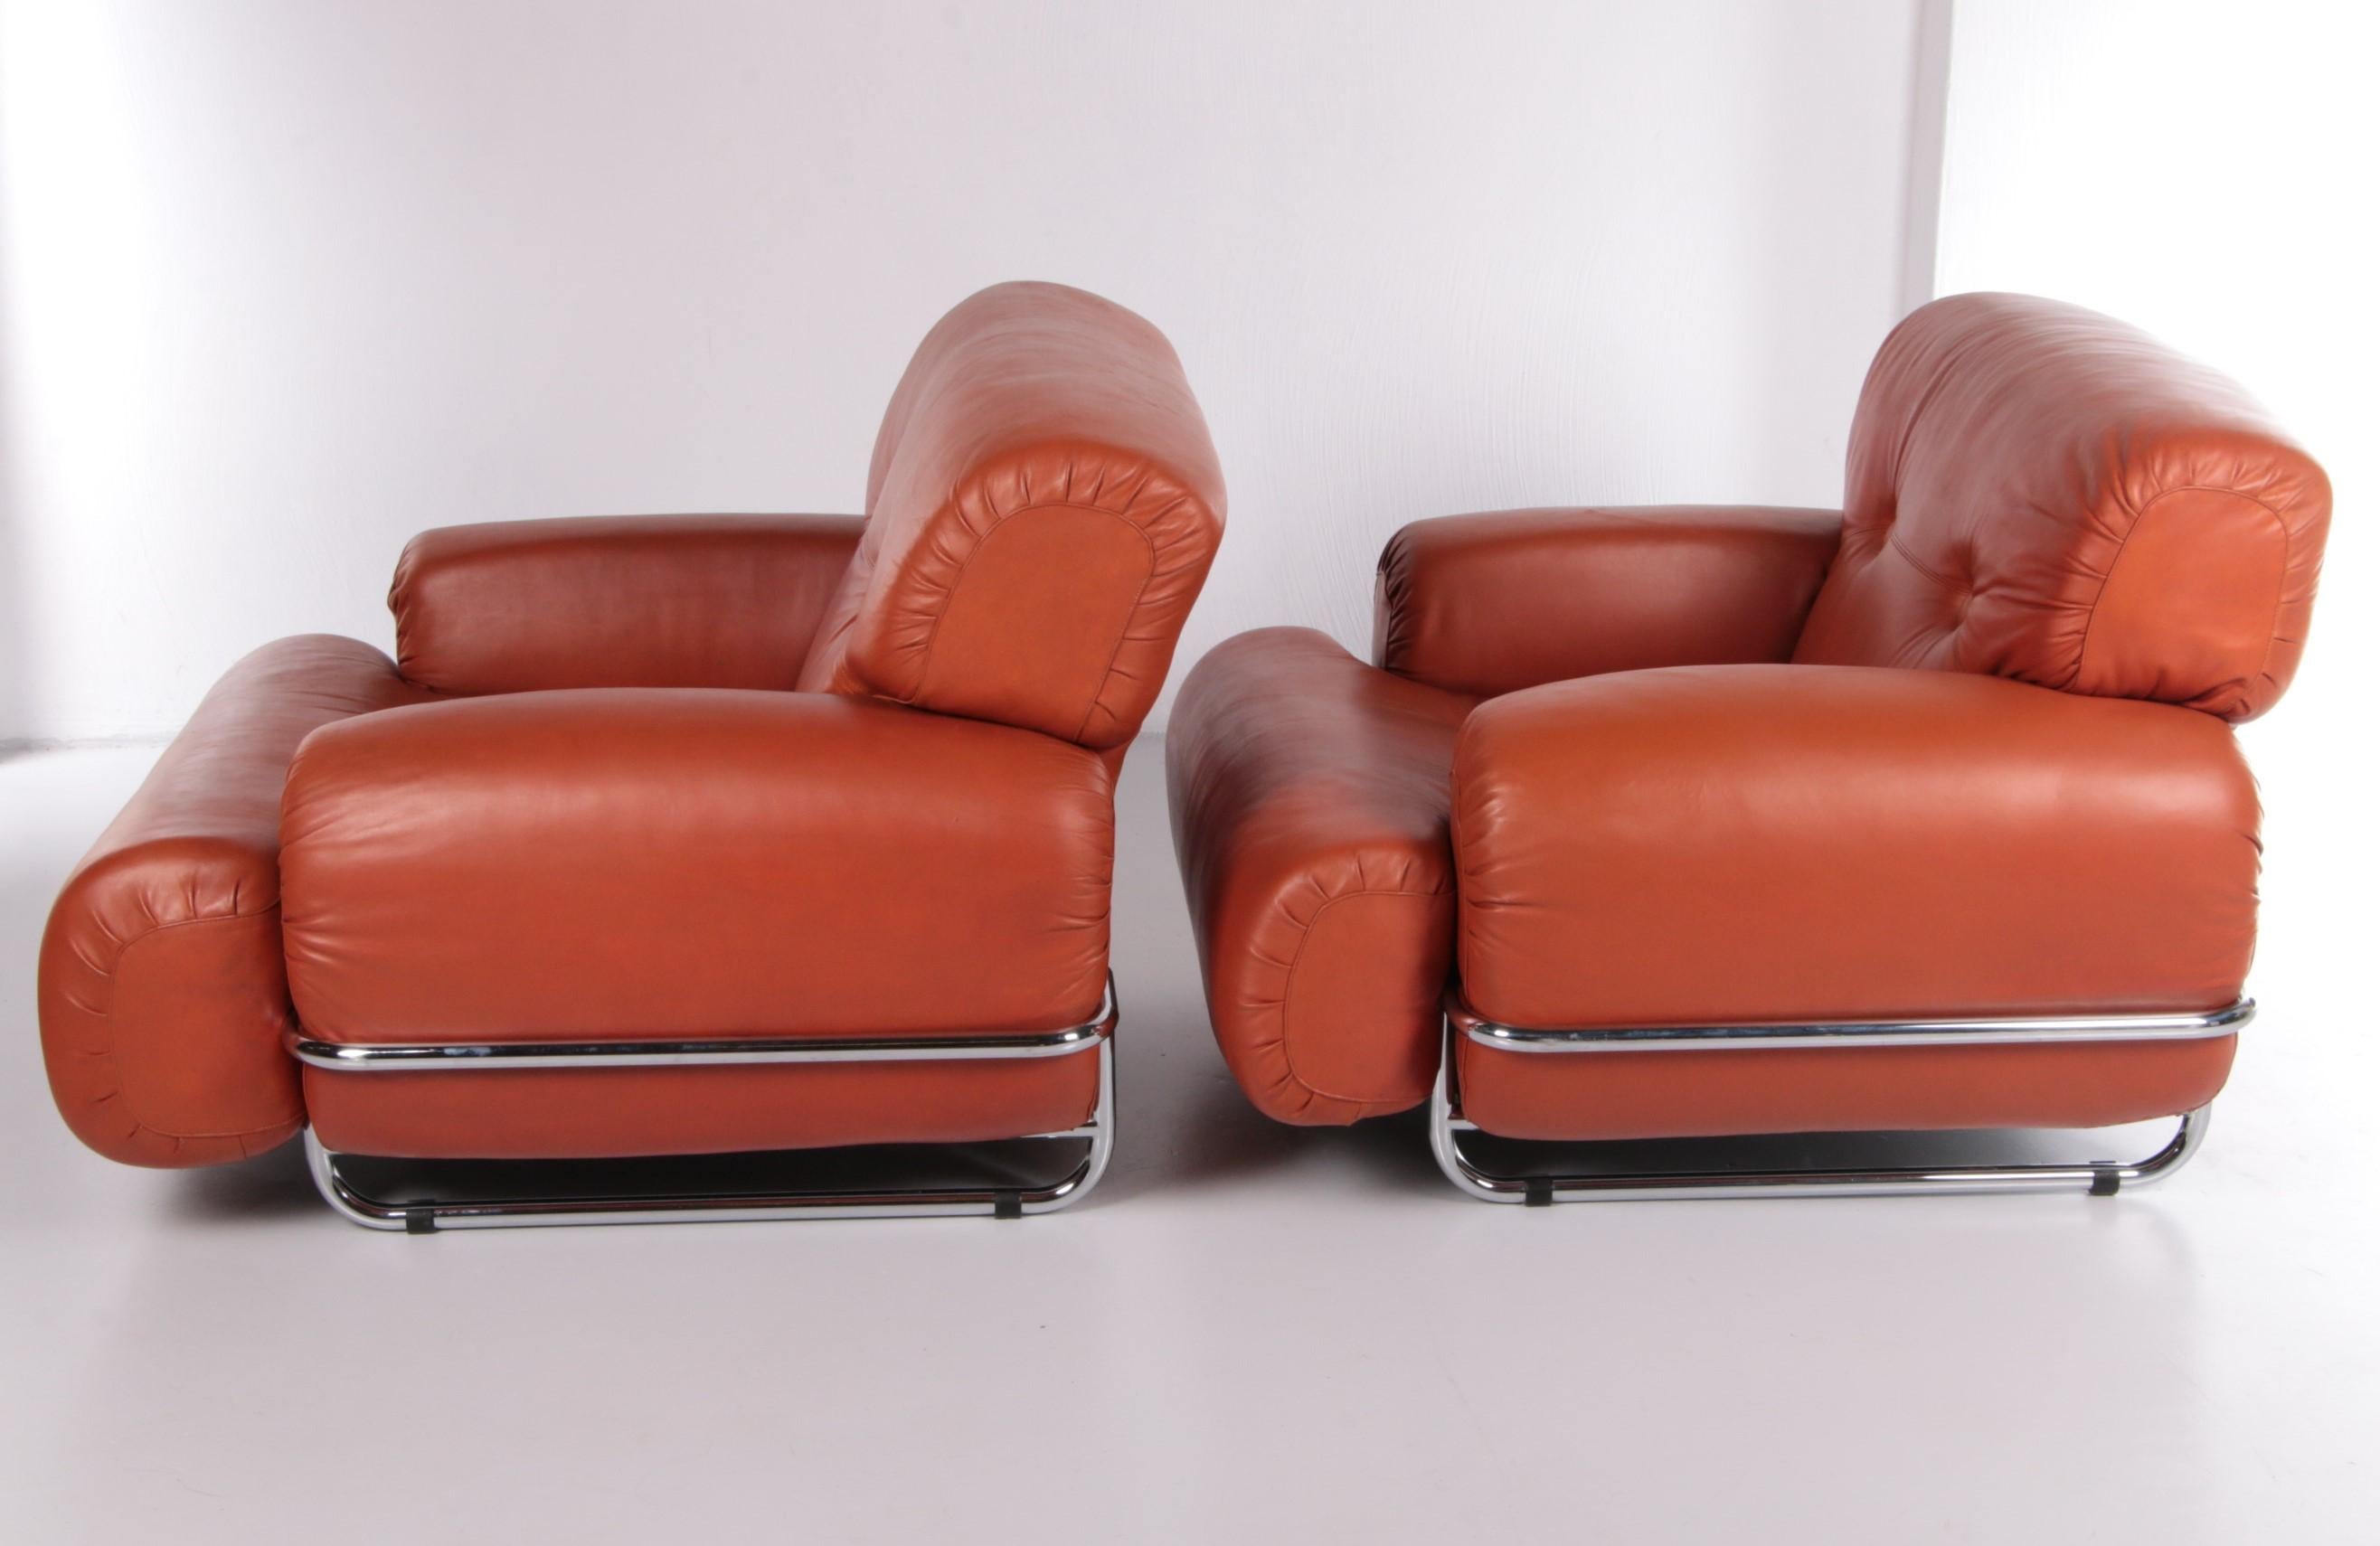 Late 20th Century Vintage Leather Armchairs Guido Faleschini Style - Set of 2 For Sale